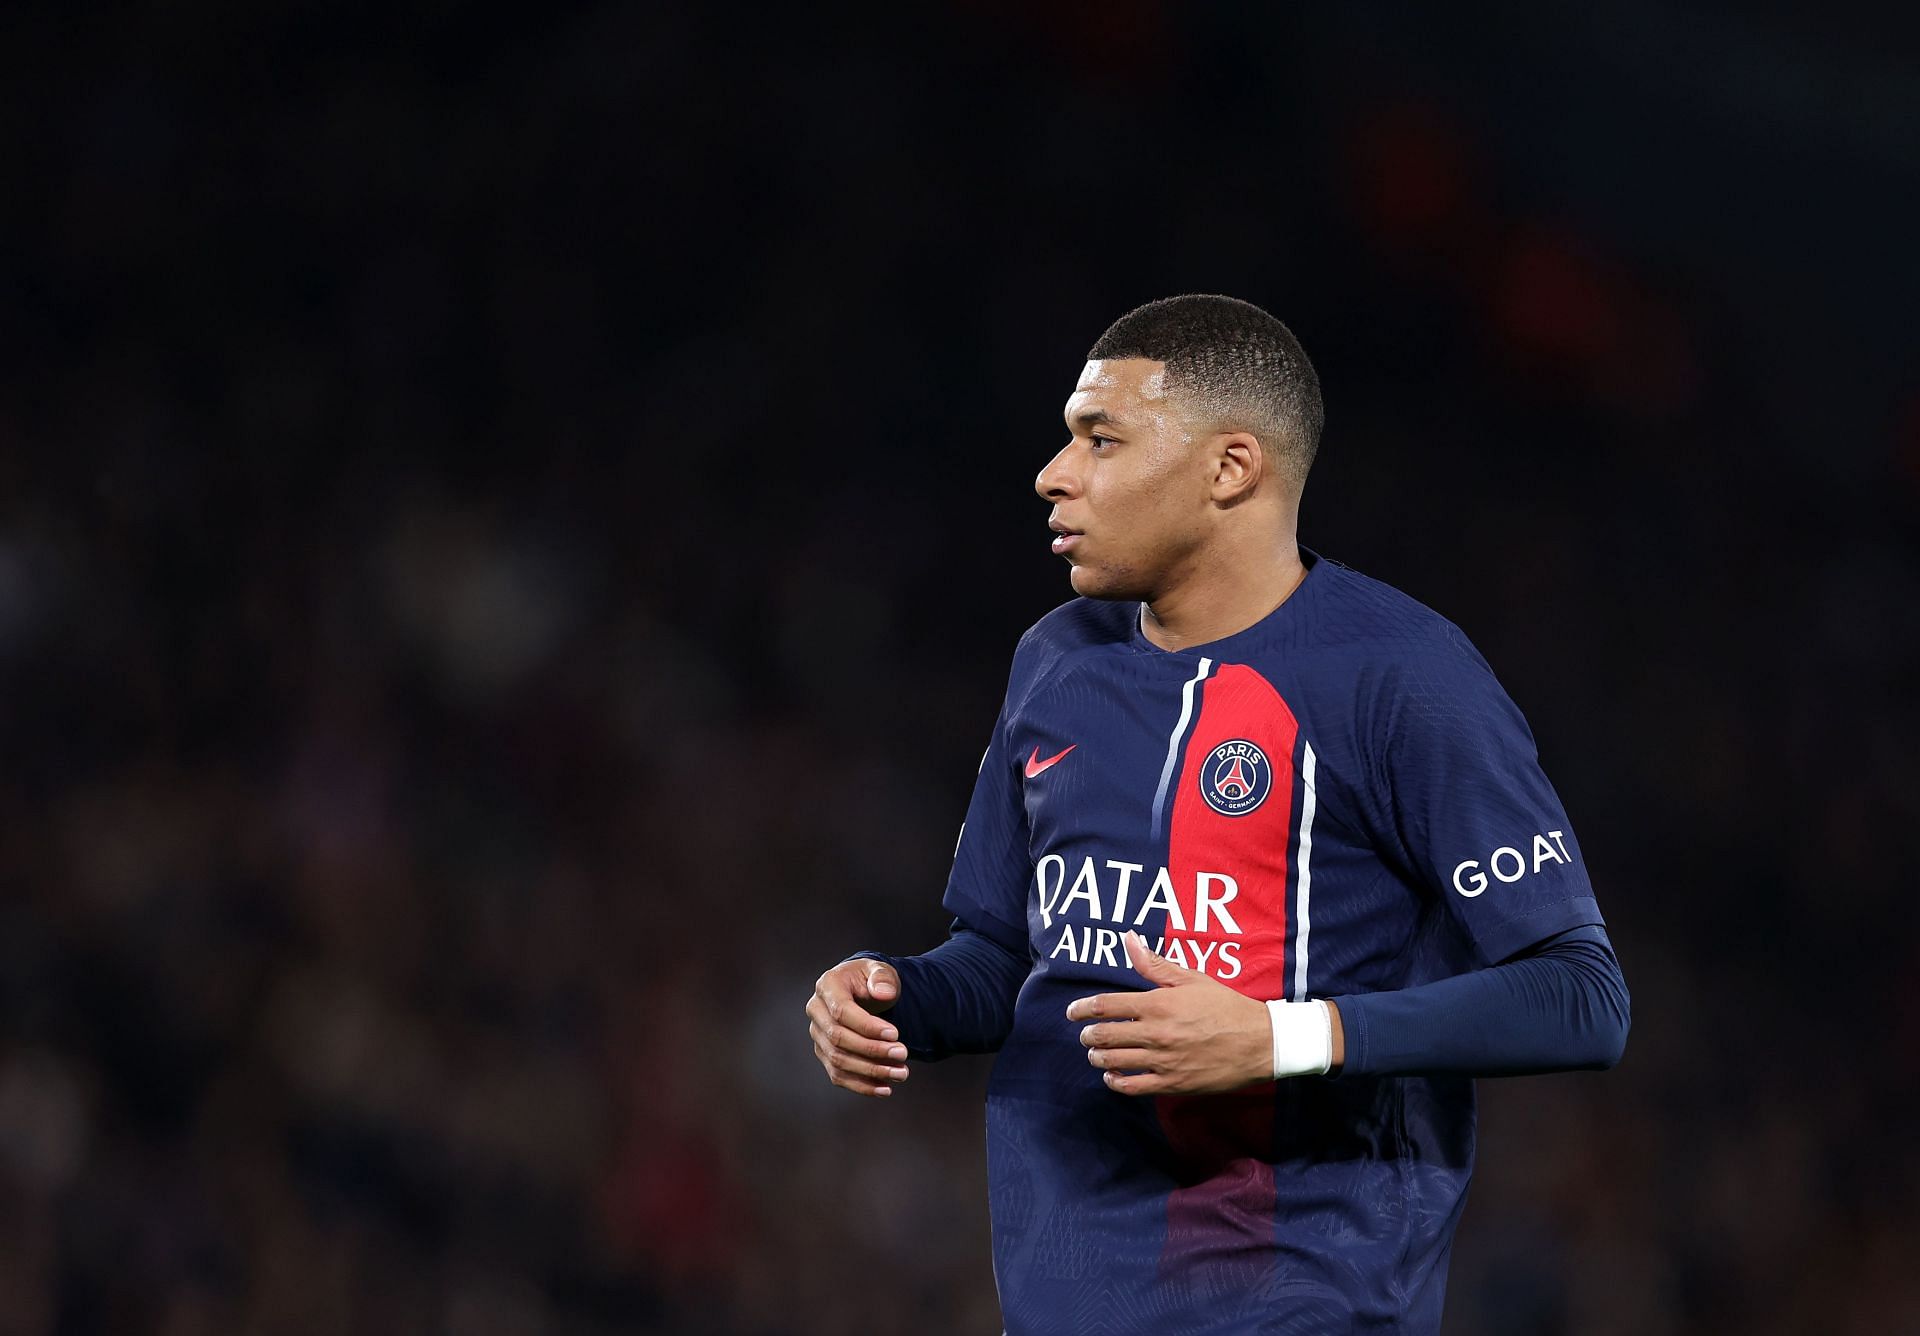 Kylian Mbappe is likely to be on the move this summer.